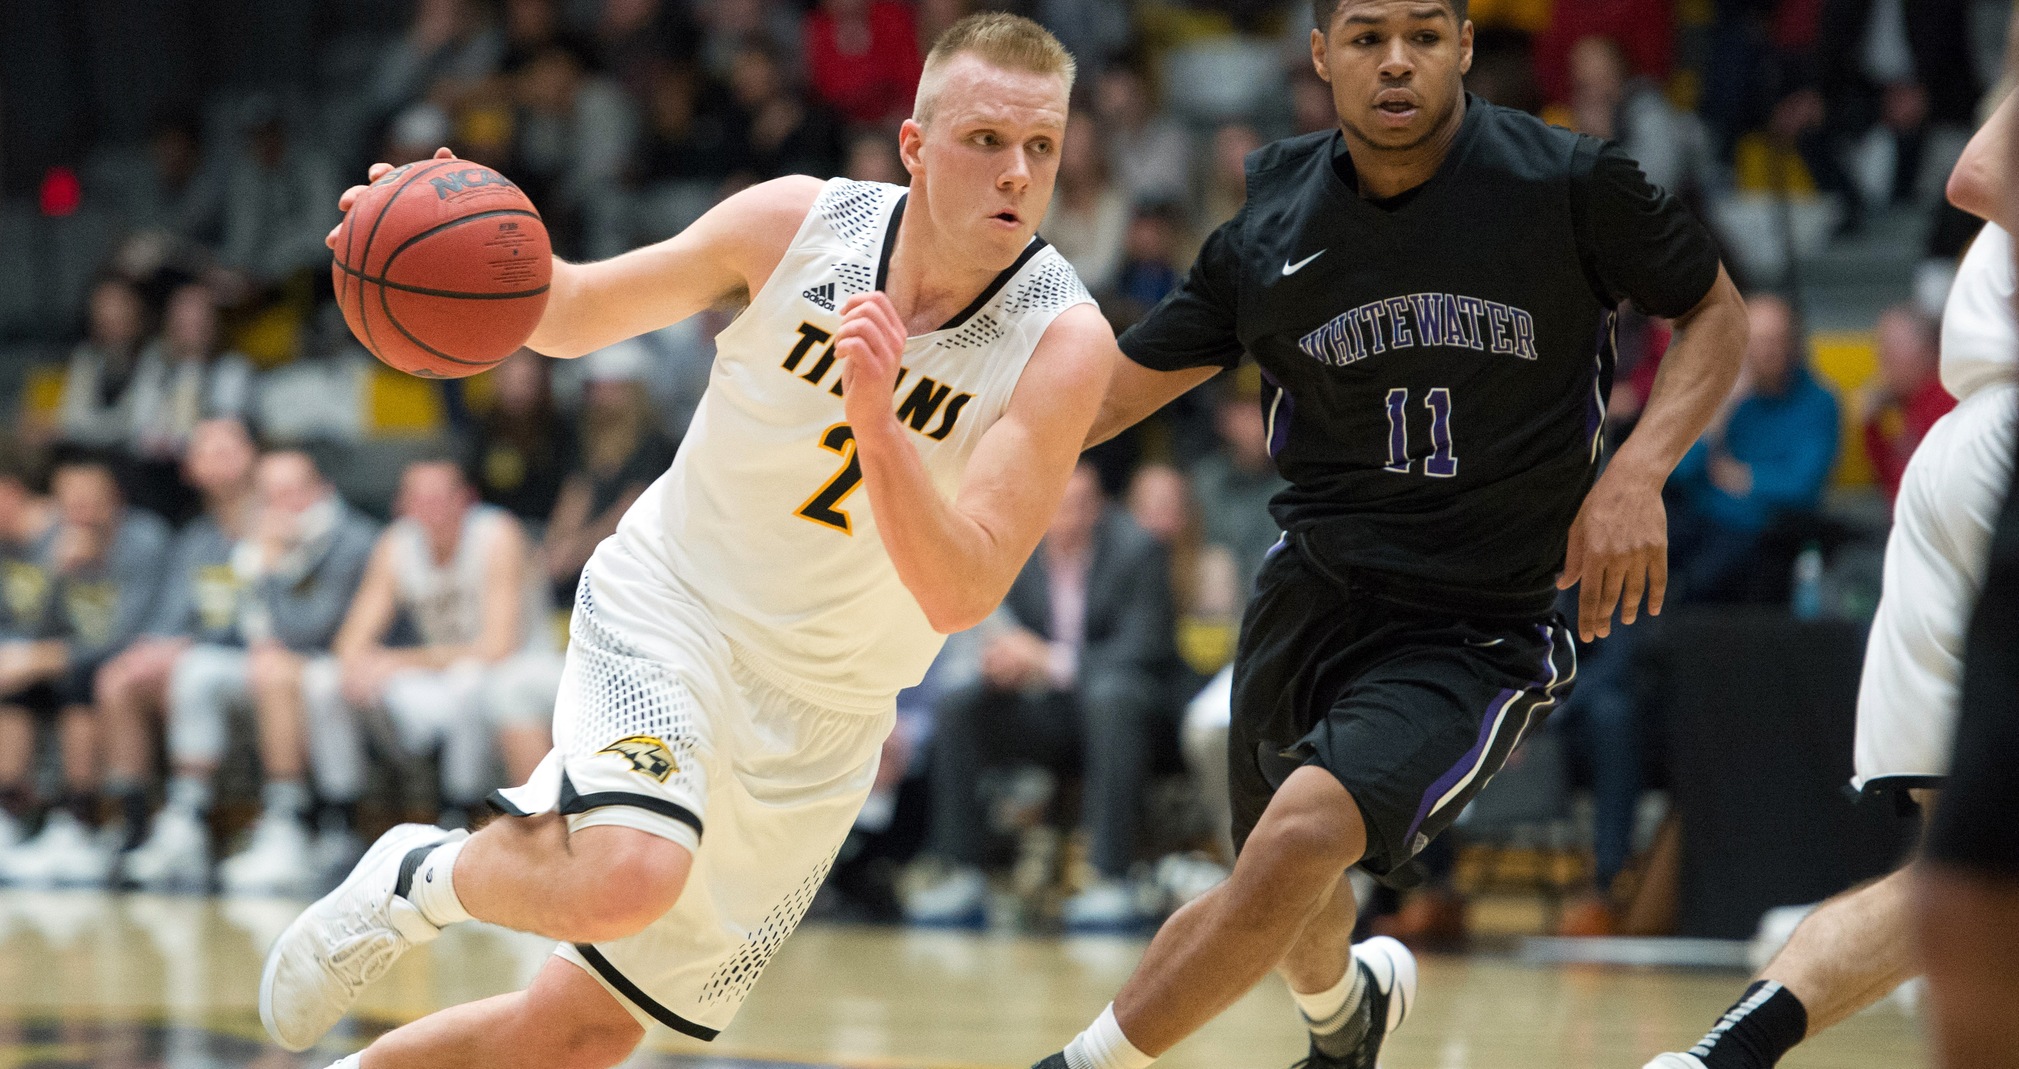 Ben Boots scored 10 points and tallied six assists to help UW-Oshkosh to the title game of the WIAC Championship.